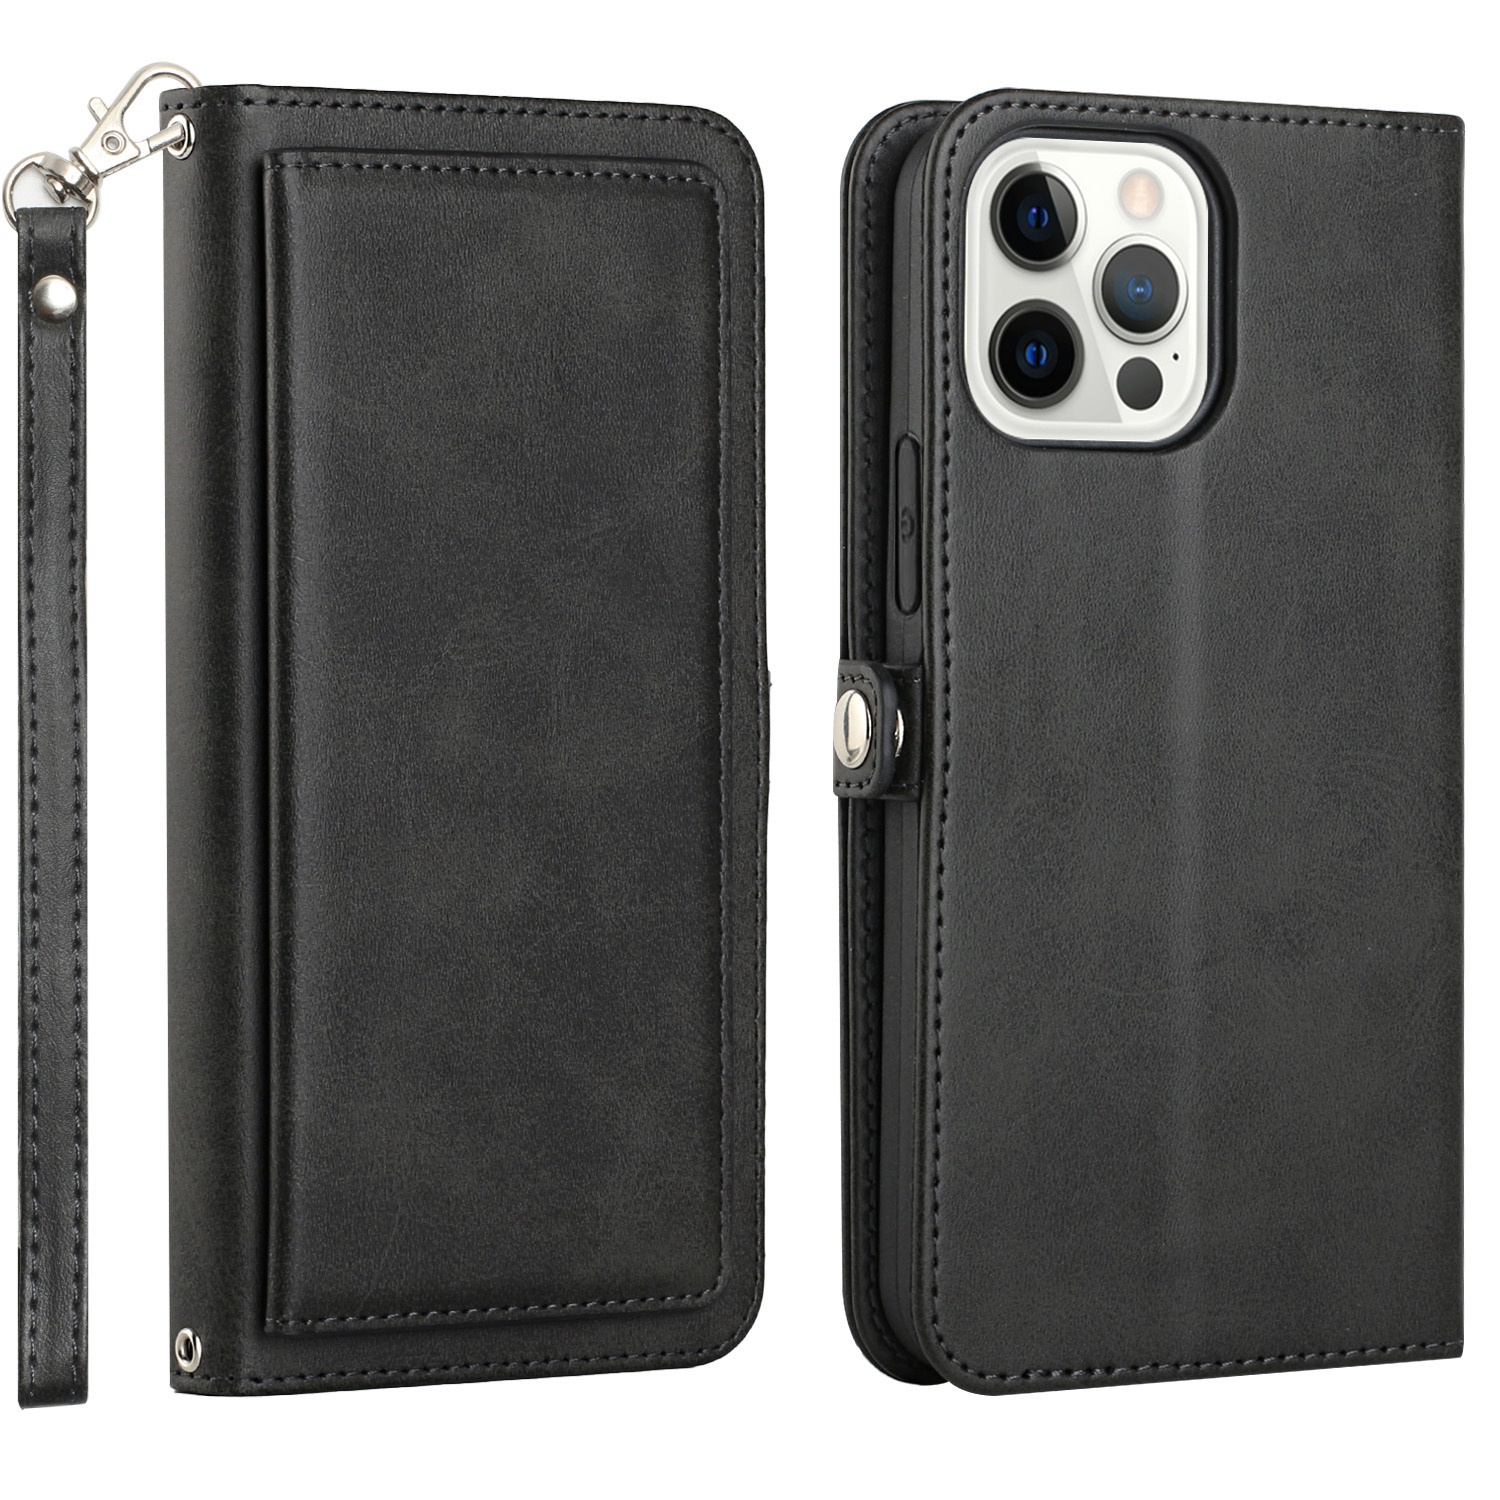 Premium Leather WALLET Cover Case with Card Slot for iPhone 14 Pro Max (Black)